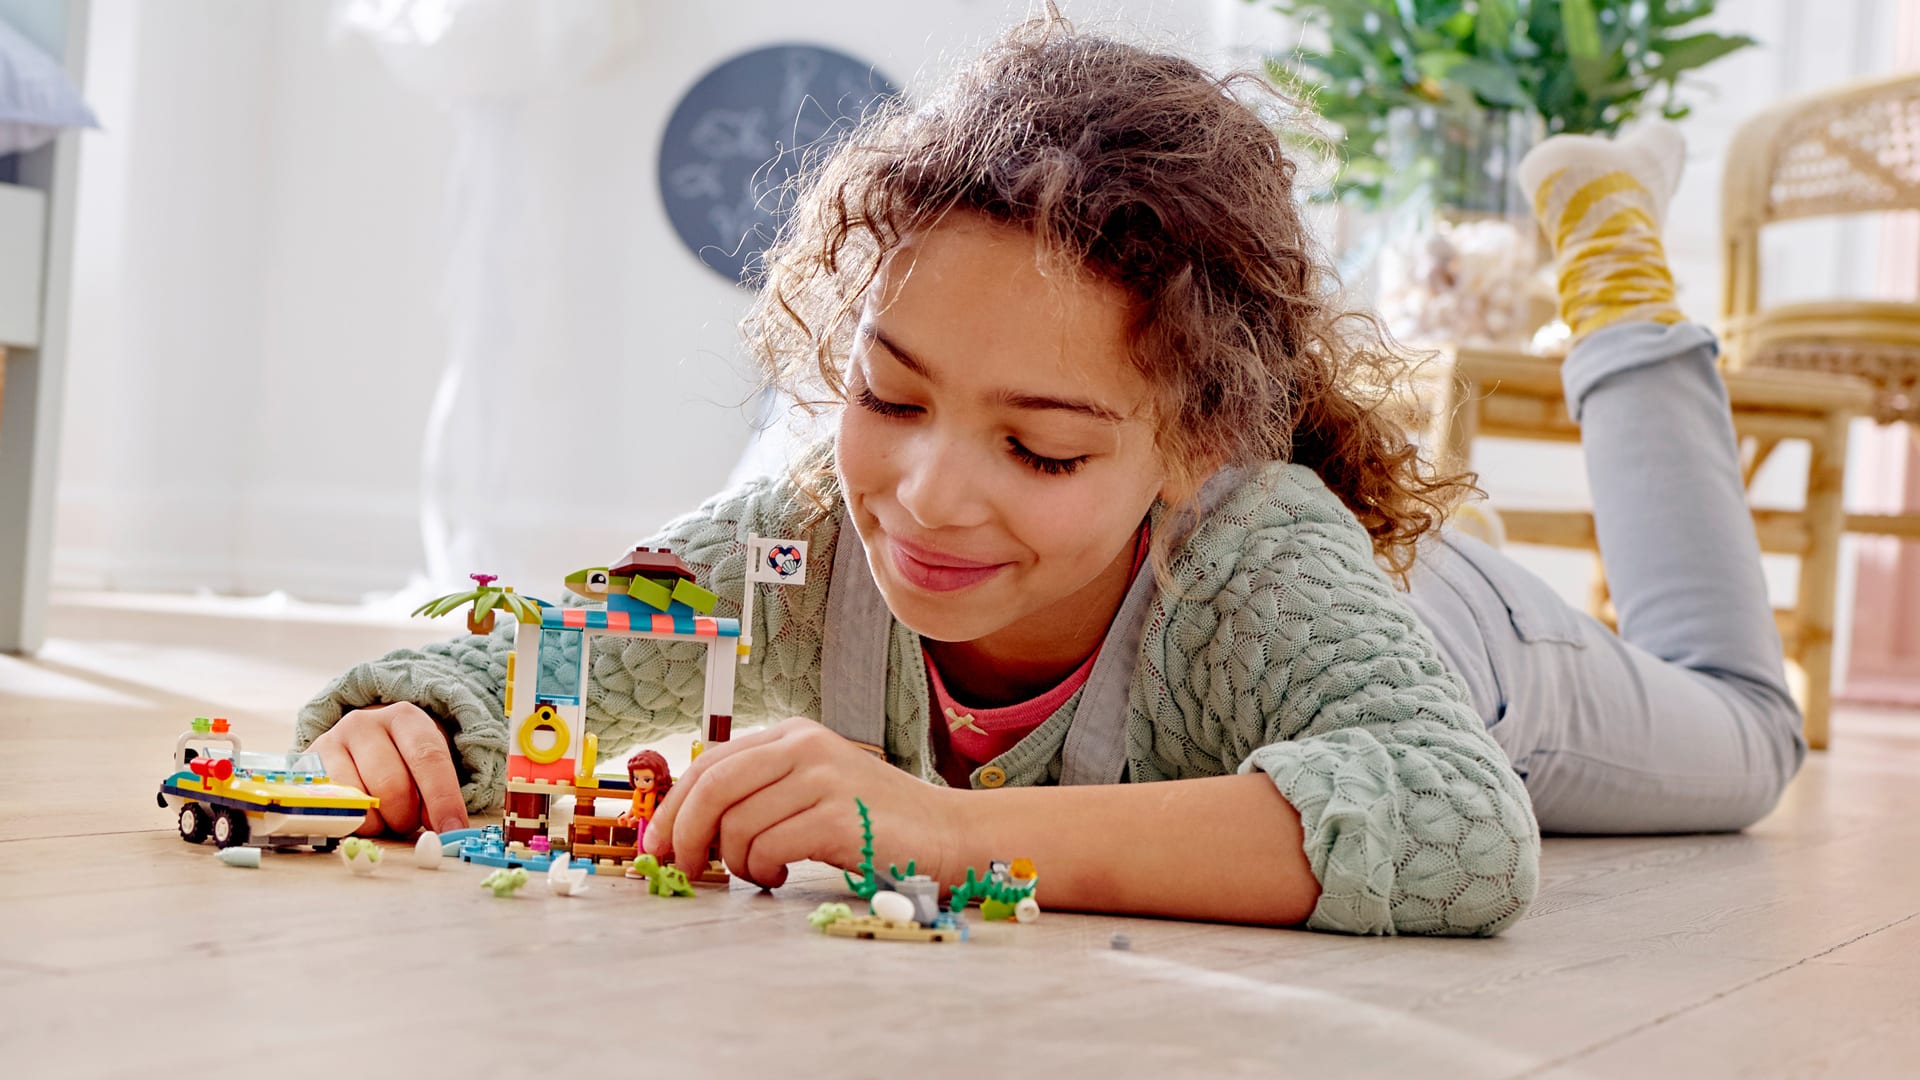 Lego’s message to parents: Playtime benefits you as much as your kids